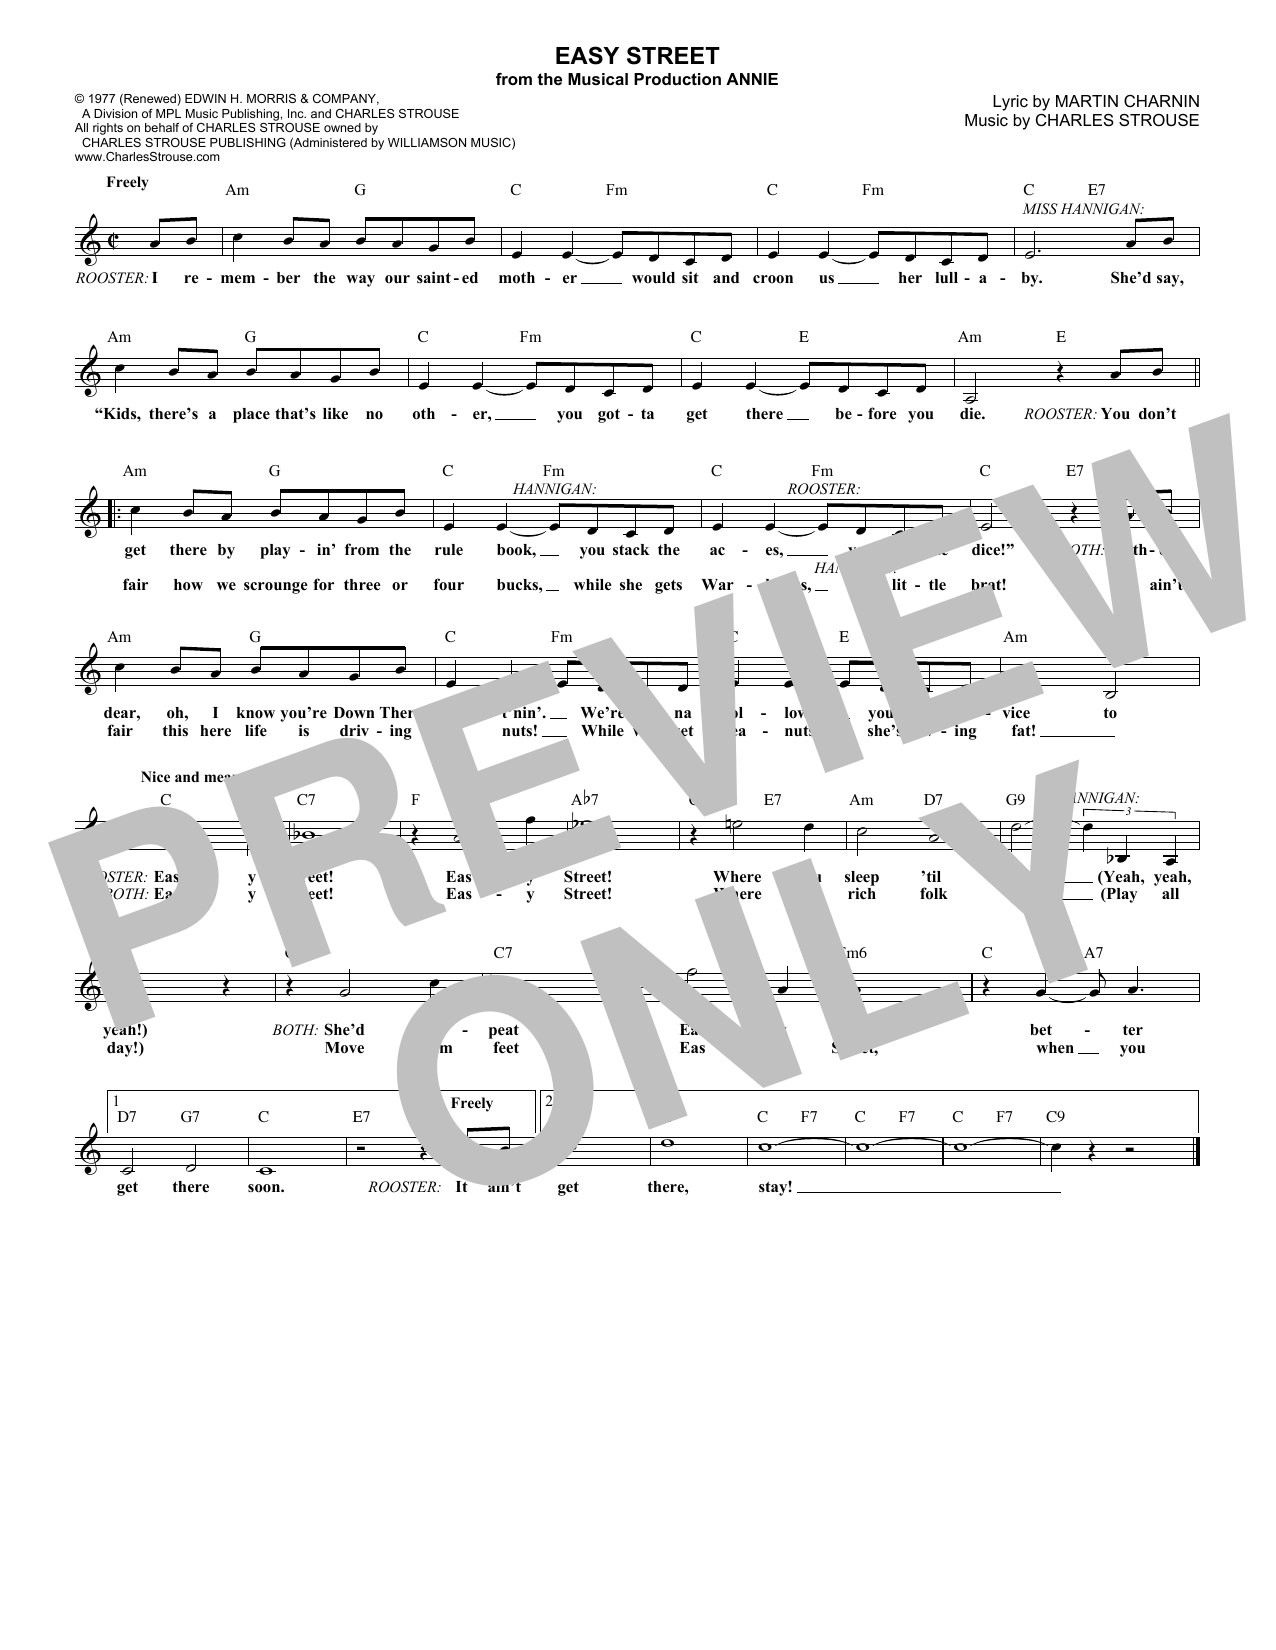 Download Charles Strouse Easy Street Sheet Music